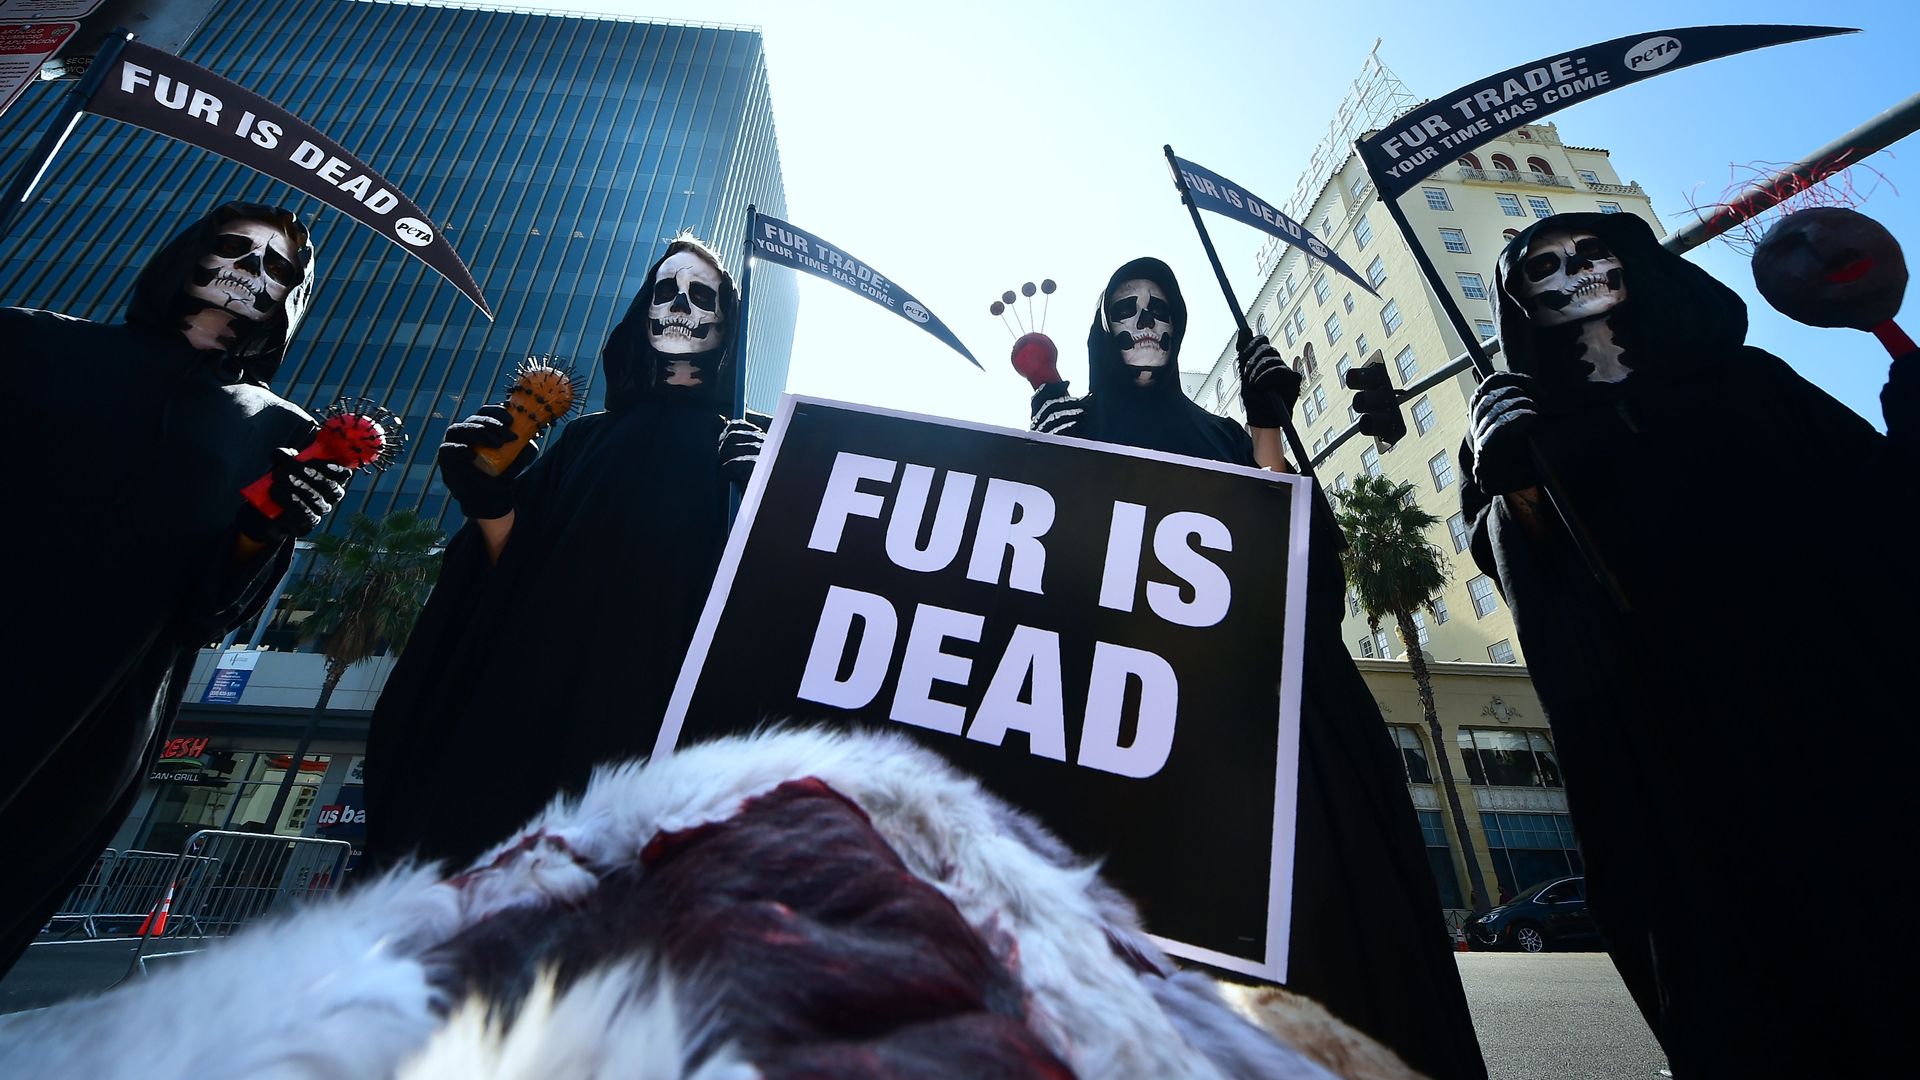 Black-robed PETA activists dressed as Grim Reapers hold a 'Fur is Dead' rally along Hollywood Boulevard on October 25, 2018 in Hollywood, California